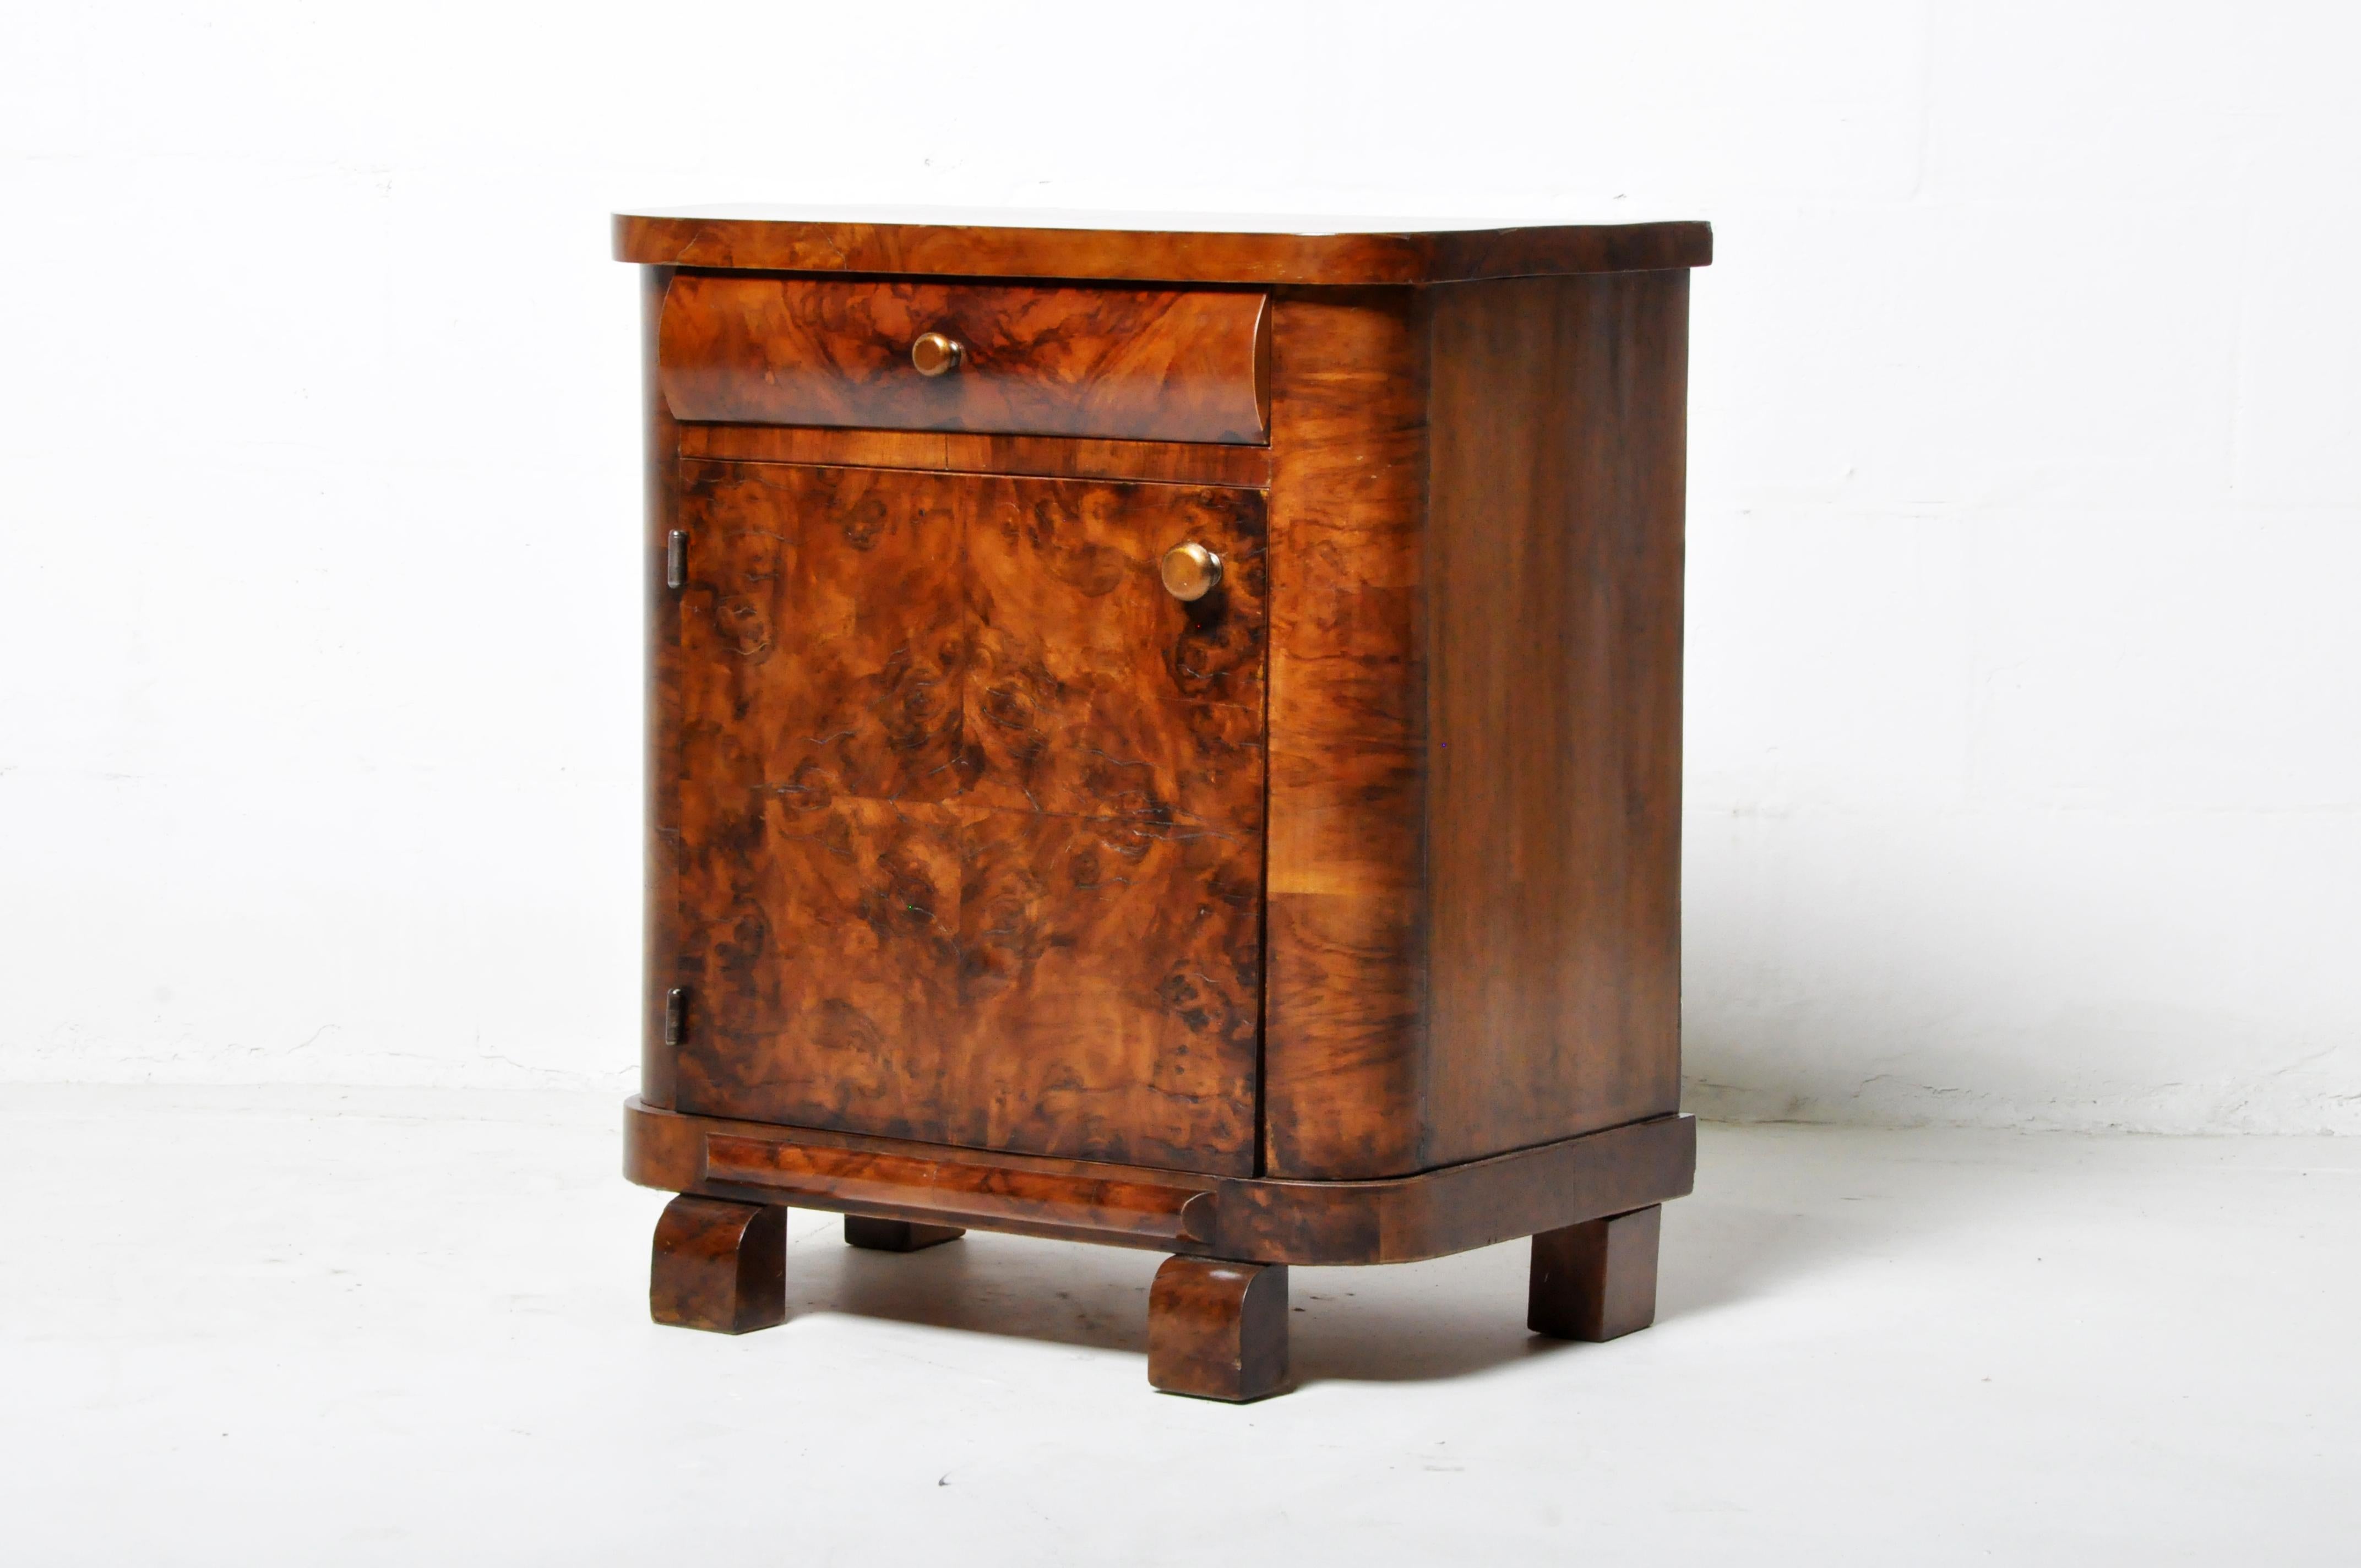 This beautiful Art Deco side chest is from Budapest, Hungary, and was made from walnut veneer, c. 1940. The side chest features a drawer, a door that opens up for storage, and a beautifully aged patina. Wear consistent with age and use; patina is